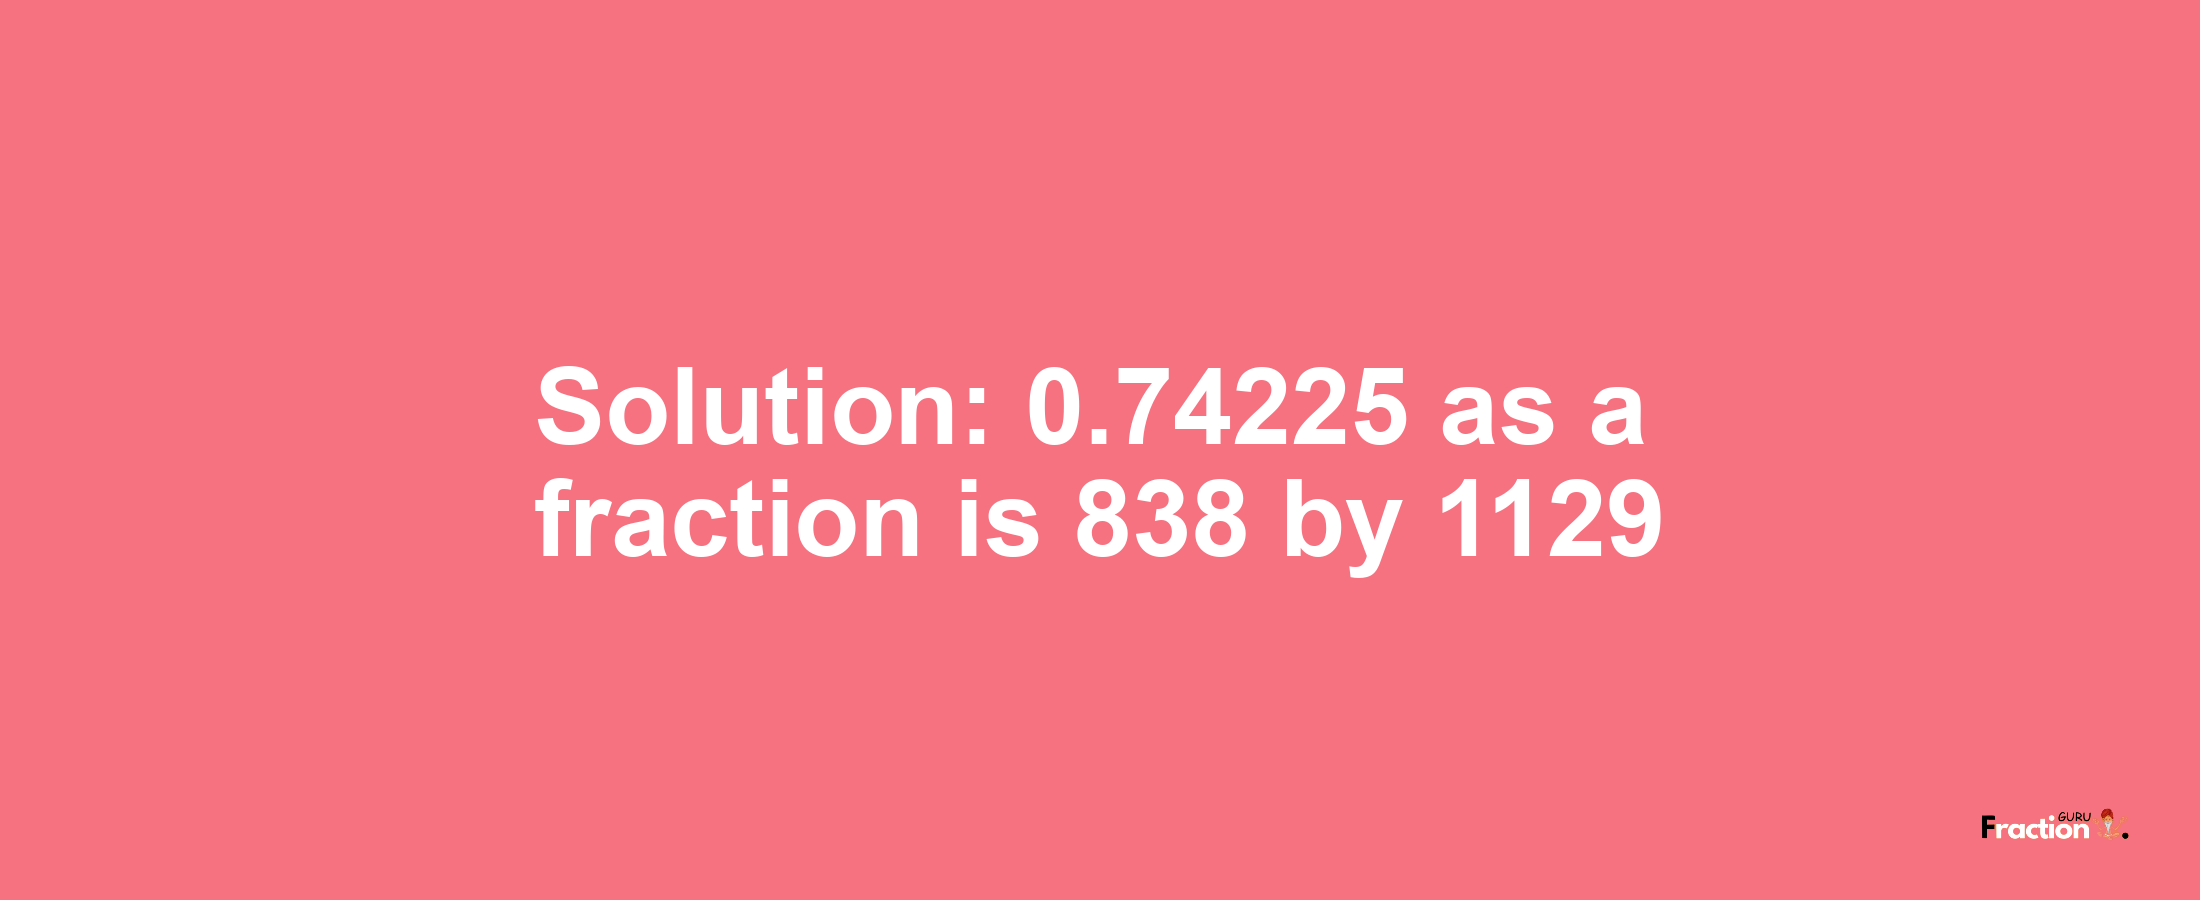 Solution:0.74225 as a fraction is 838/1129